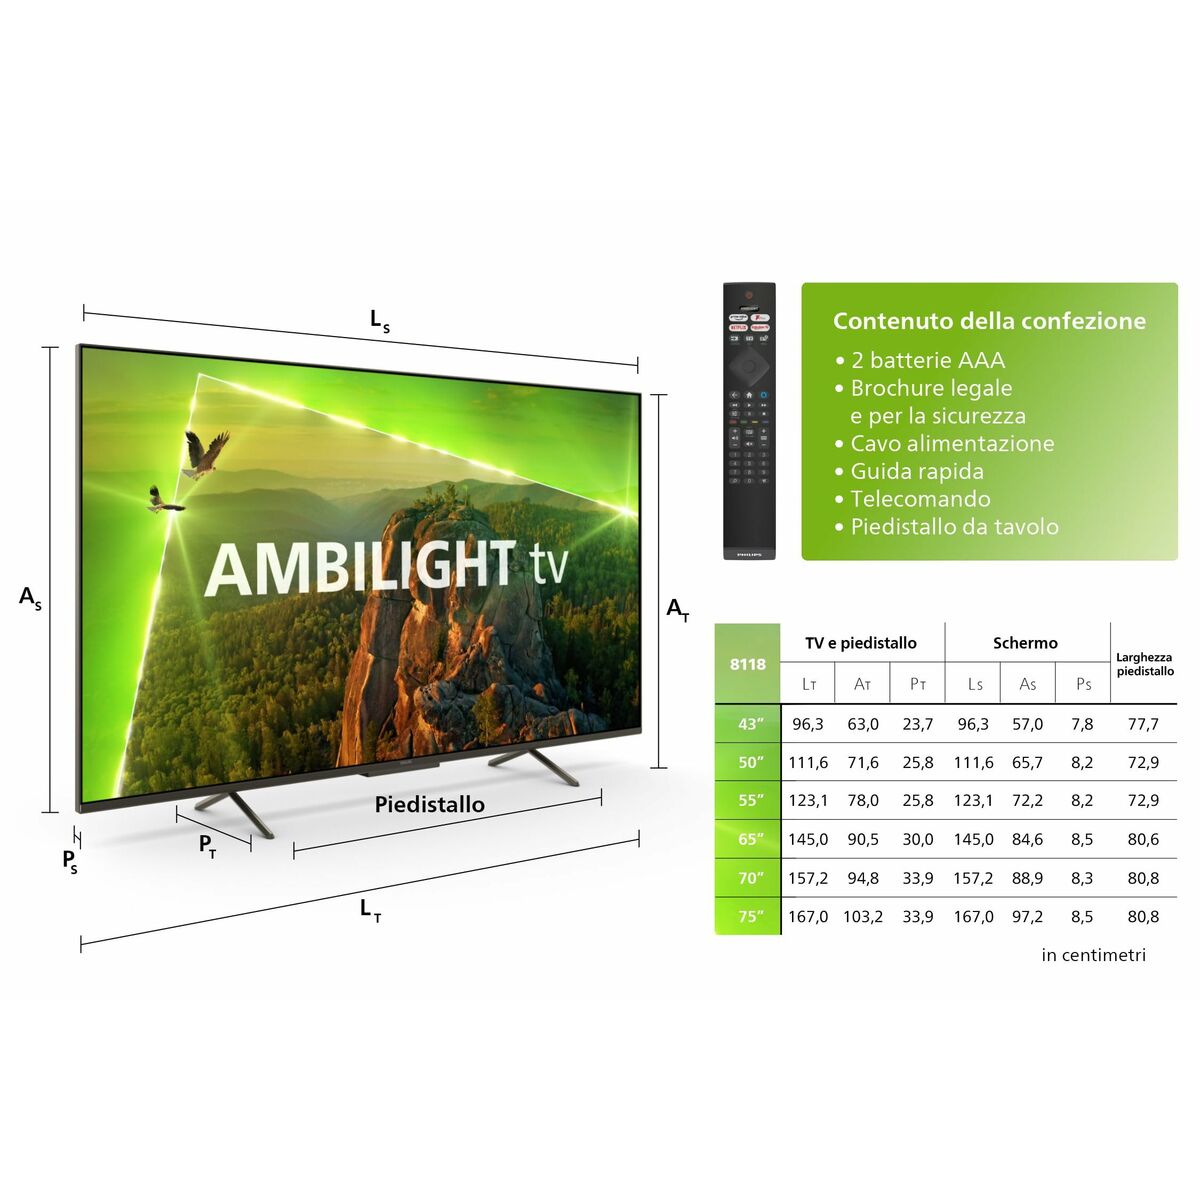 Smart TV Philips 65PUS8118 65" 4K Ultra HD LED HDR, Philips, Electronics, TV, Video and home cinema, smart-tv-philips-65pus8118-65-4k-ultra-hd-led-hdr, Brand_Philips, category-reference-2609, category-reference-2625, category-reference-2931, category-reference-t-18805, category-reference-t-19653, cinema and television, Condition_NEW, entertainment, Price_700 - 800, RiotNook